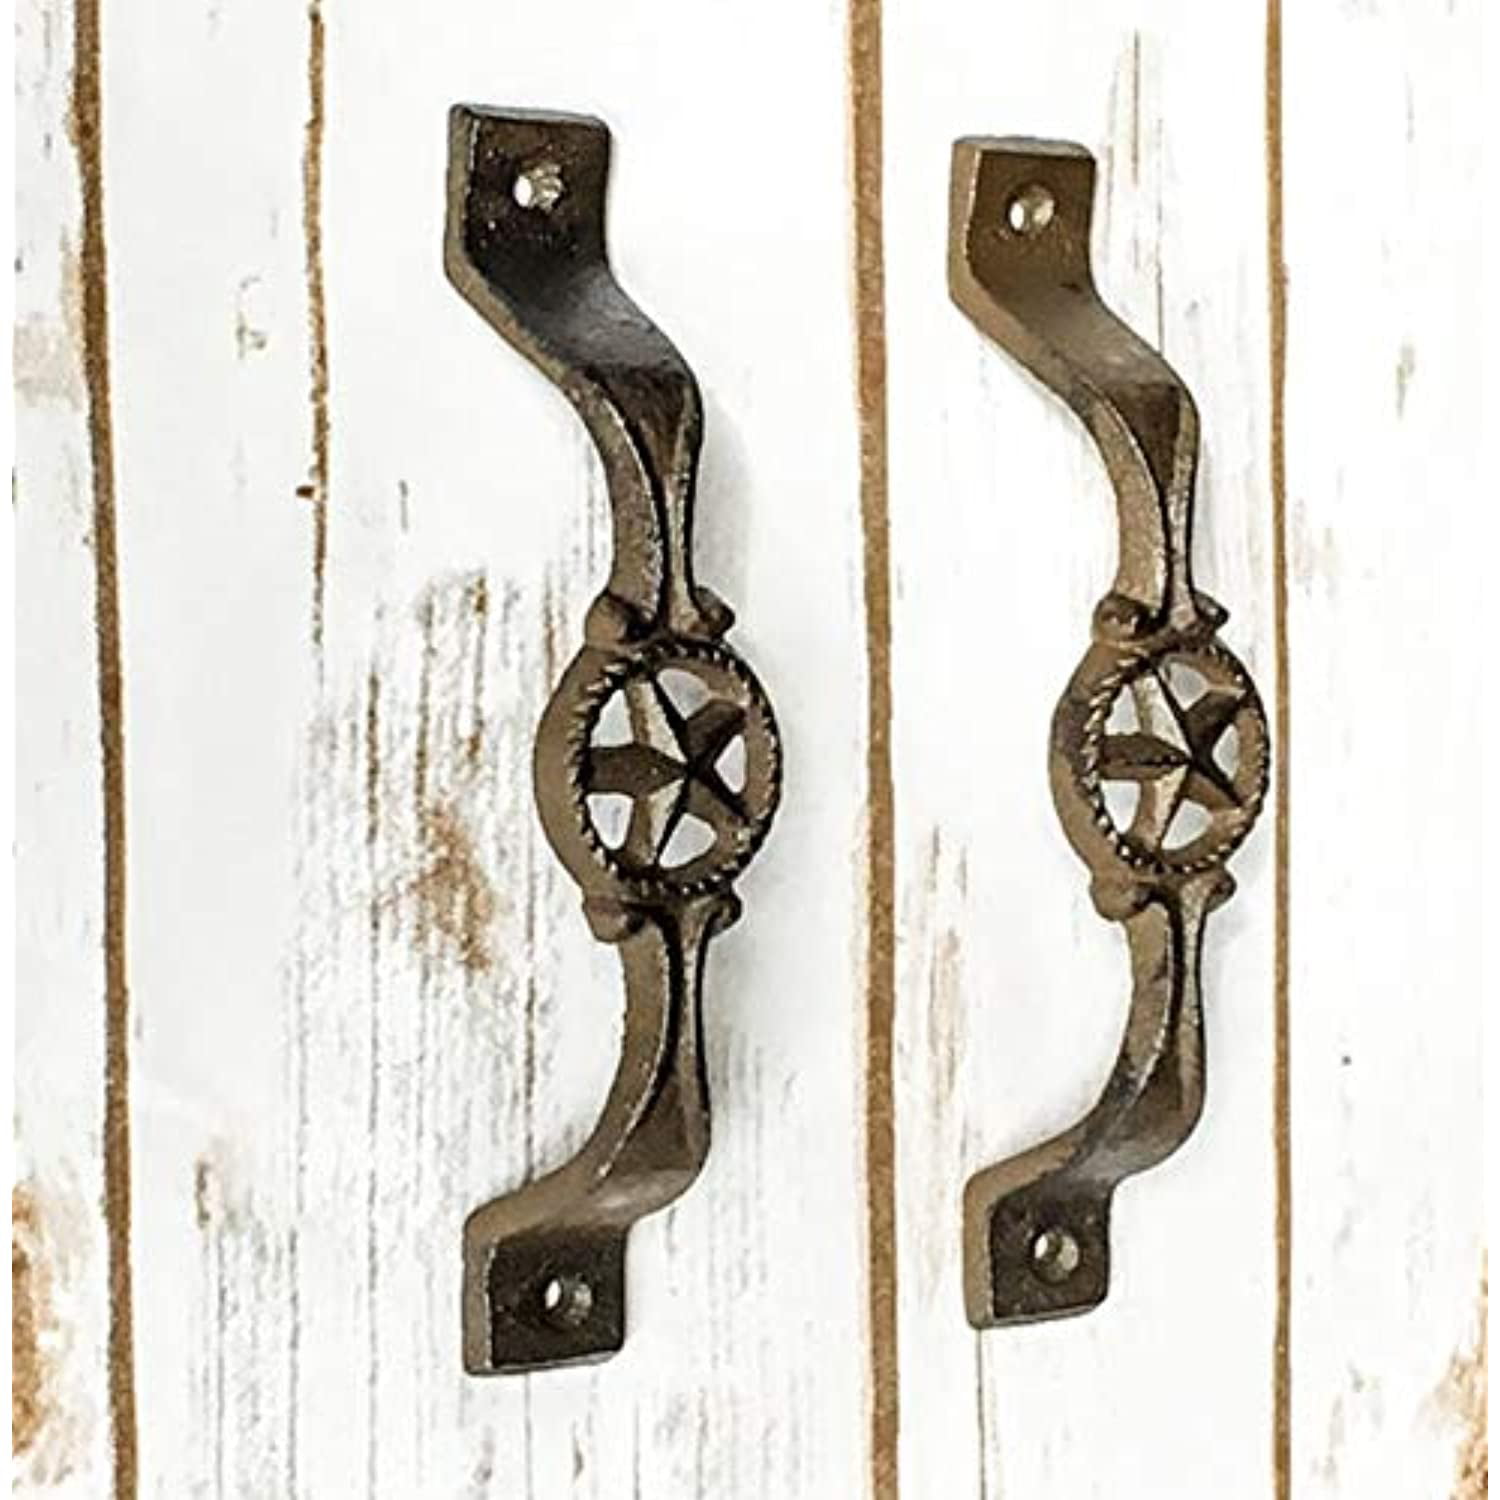 Details about   Vintage cast iron cabinet drawer door Moon Face knobs handles pull rustic 4 pcs 